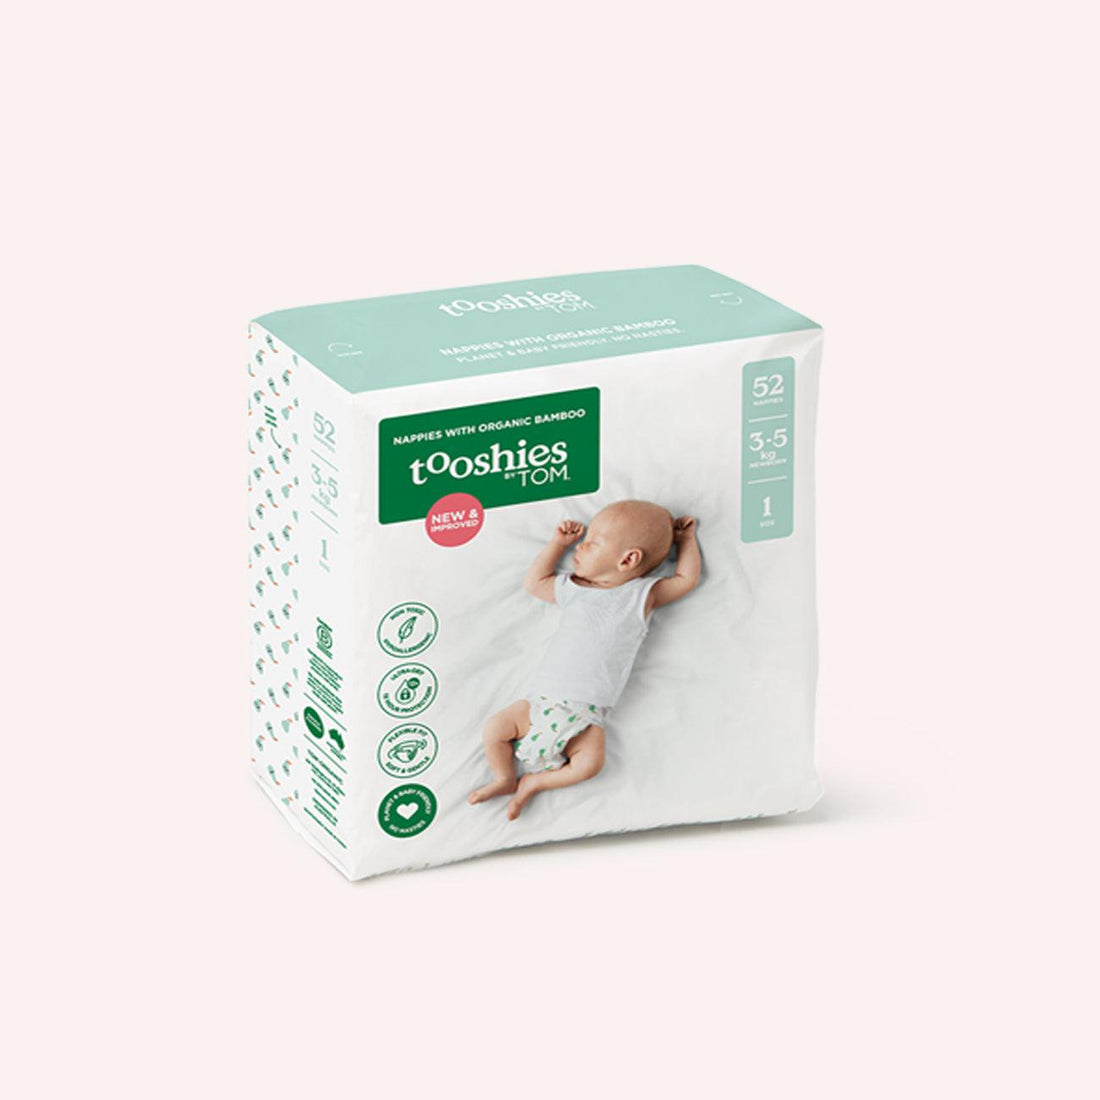 Newborn Bamboo Nappies Size 1 (3-5kg) - 52 pack